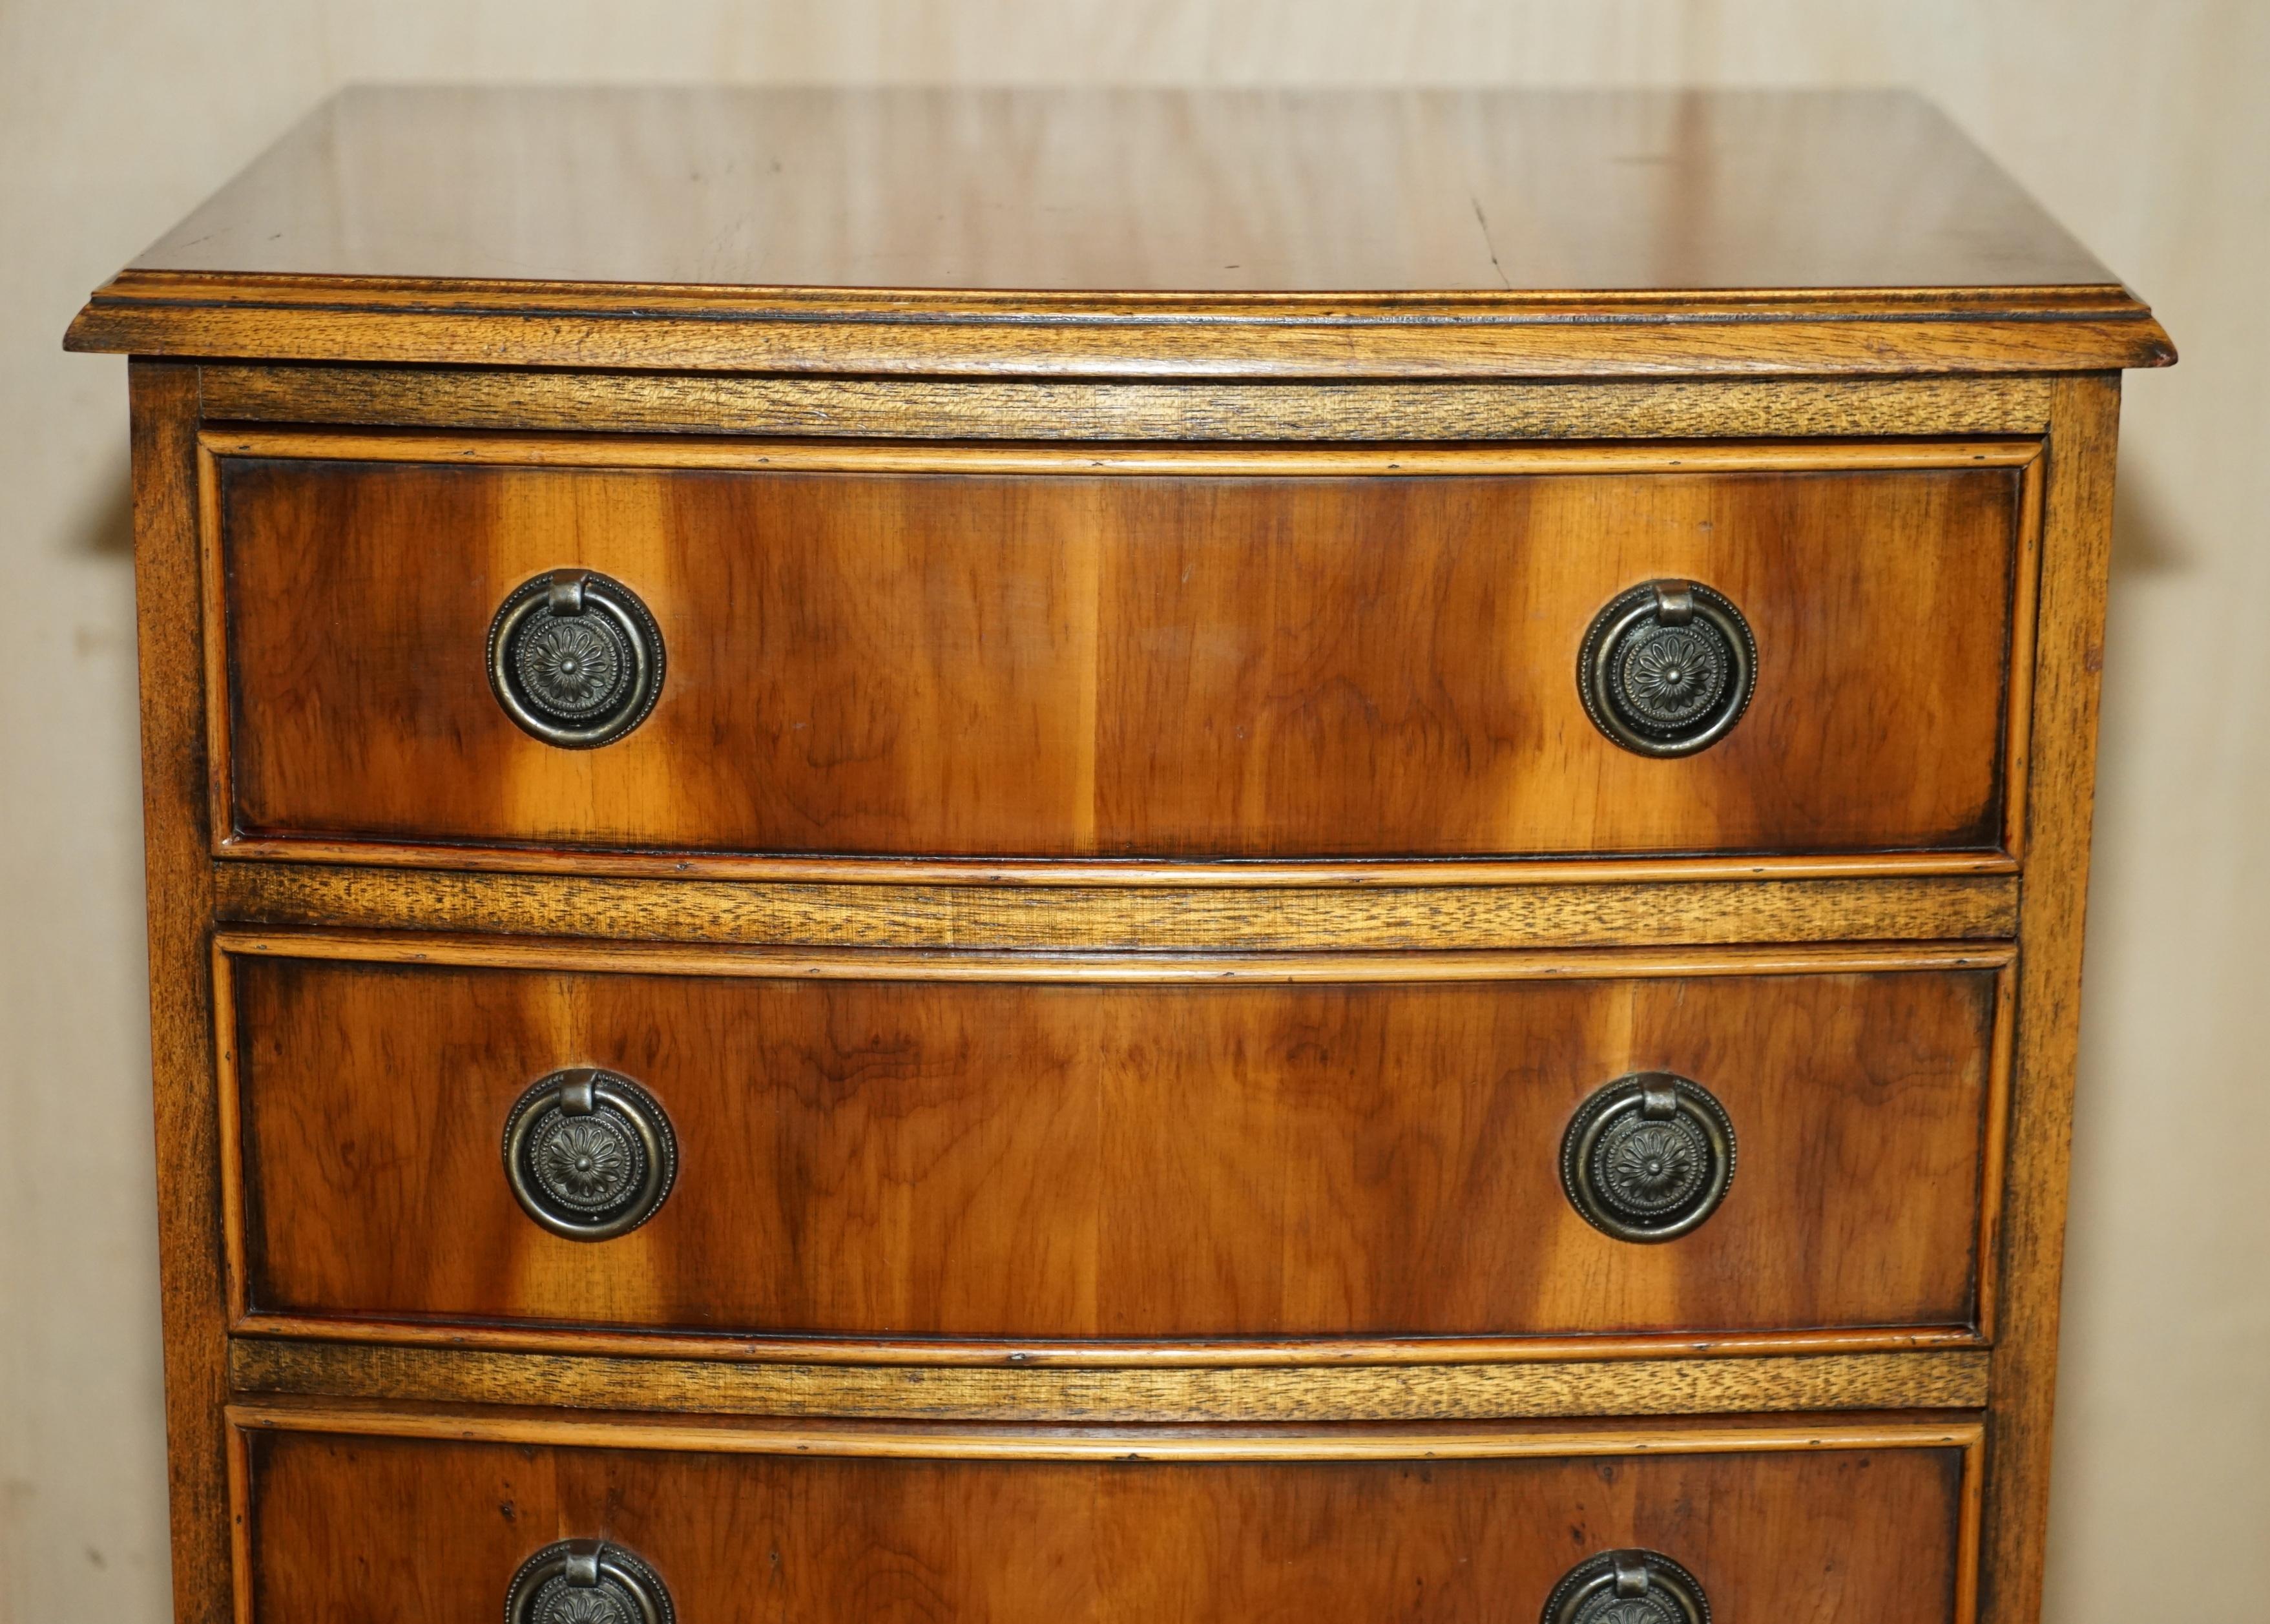 CIRCA 1940''s BURR YEW WOOD BOW FRONTED BEDSIDE SIDE TABLE CHEST OF DRAWERS im Angebot 2